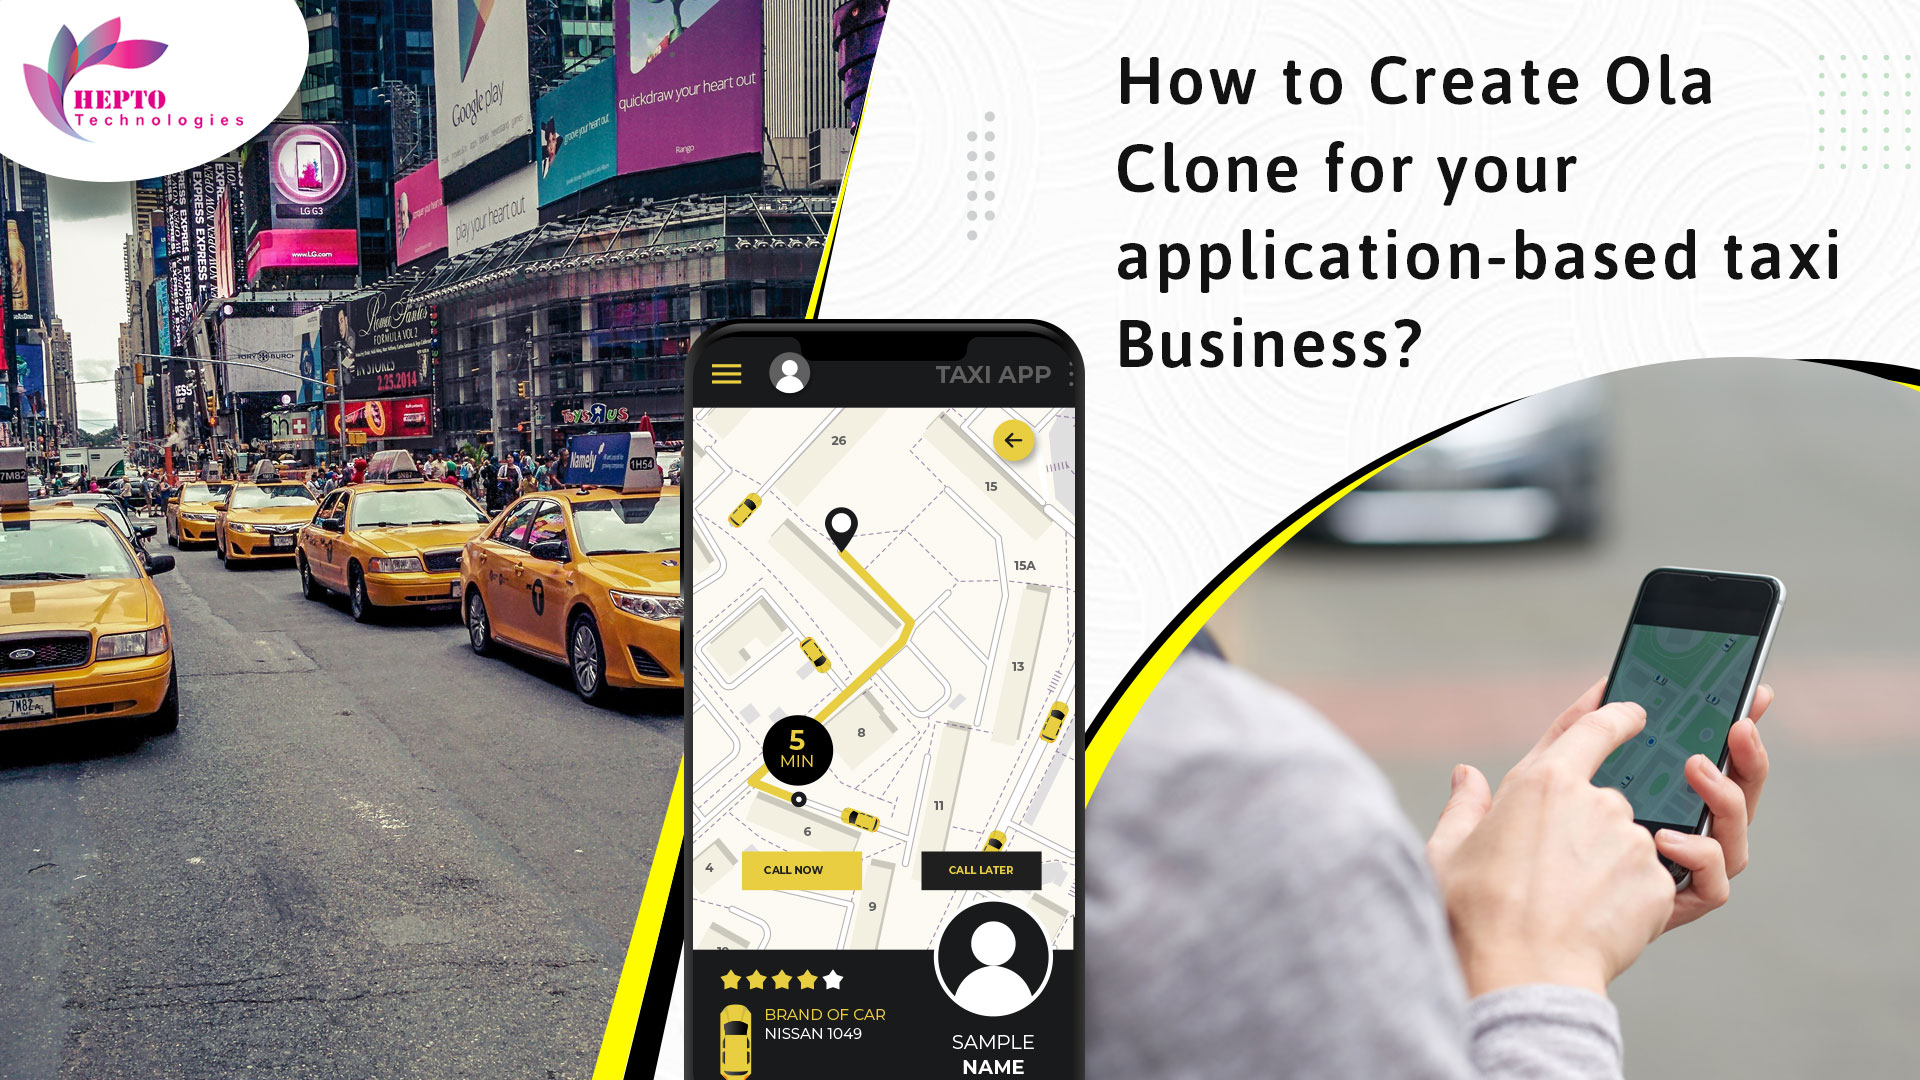 How to Create Ola Clone for your application-based taxi Business?